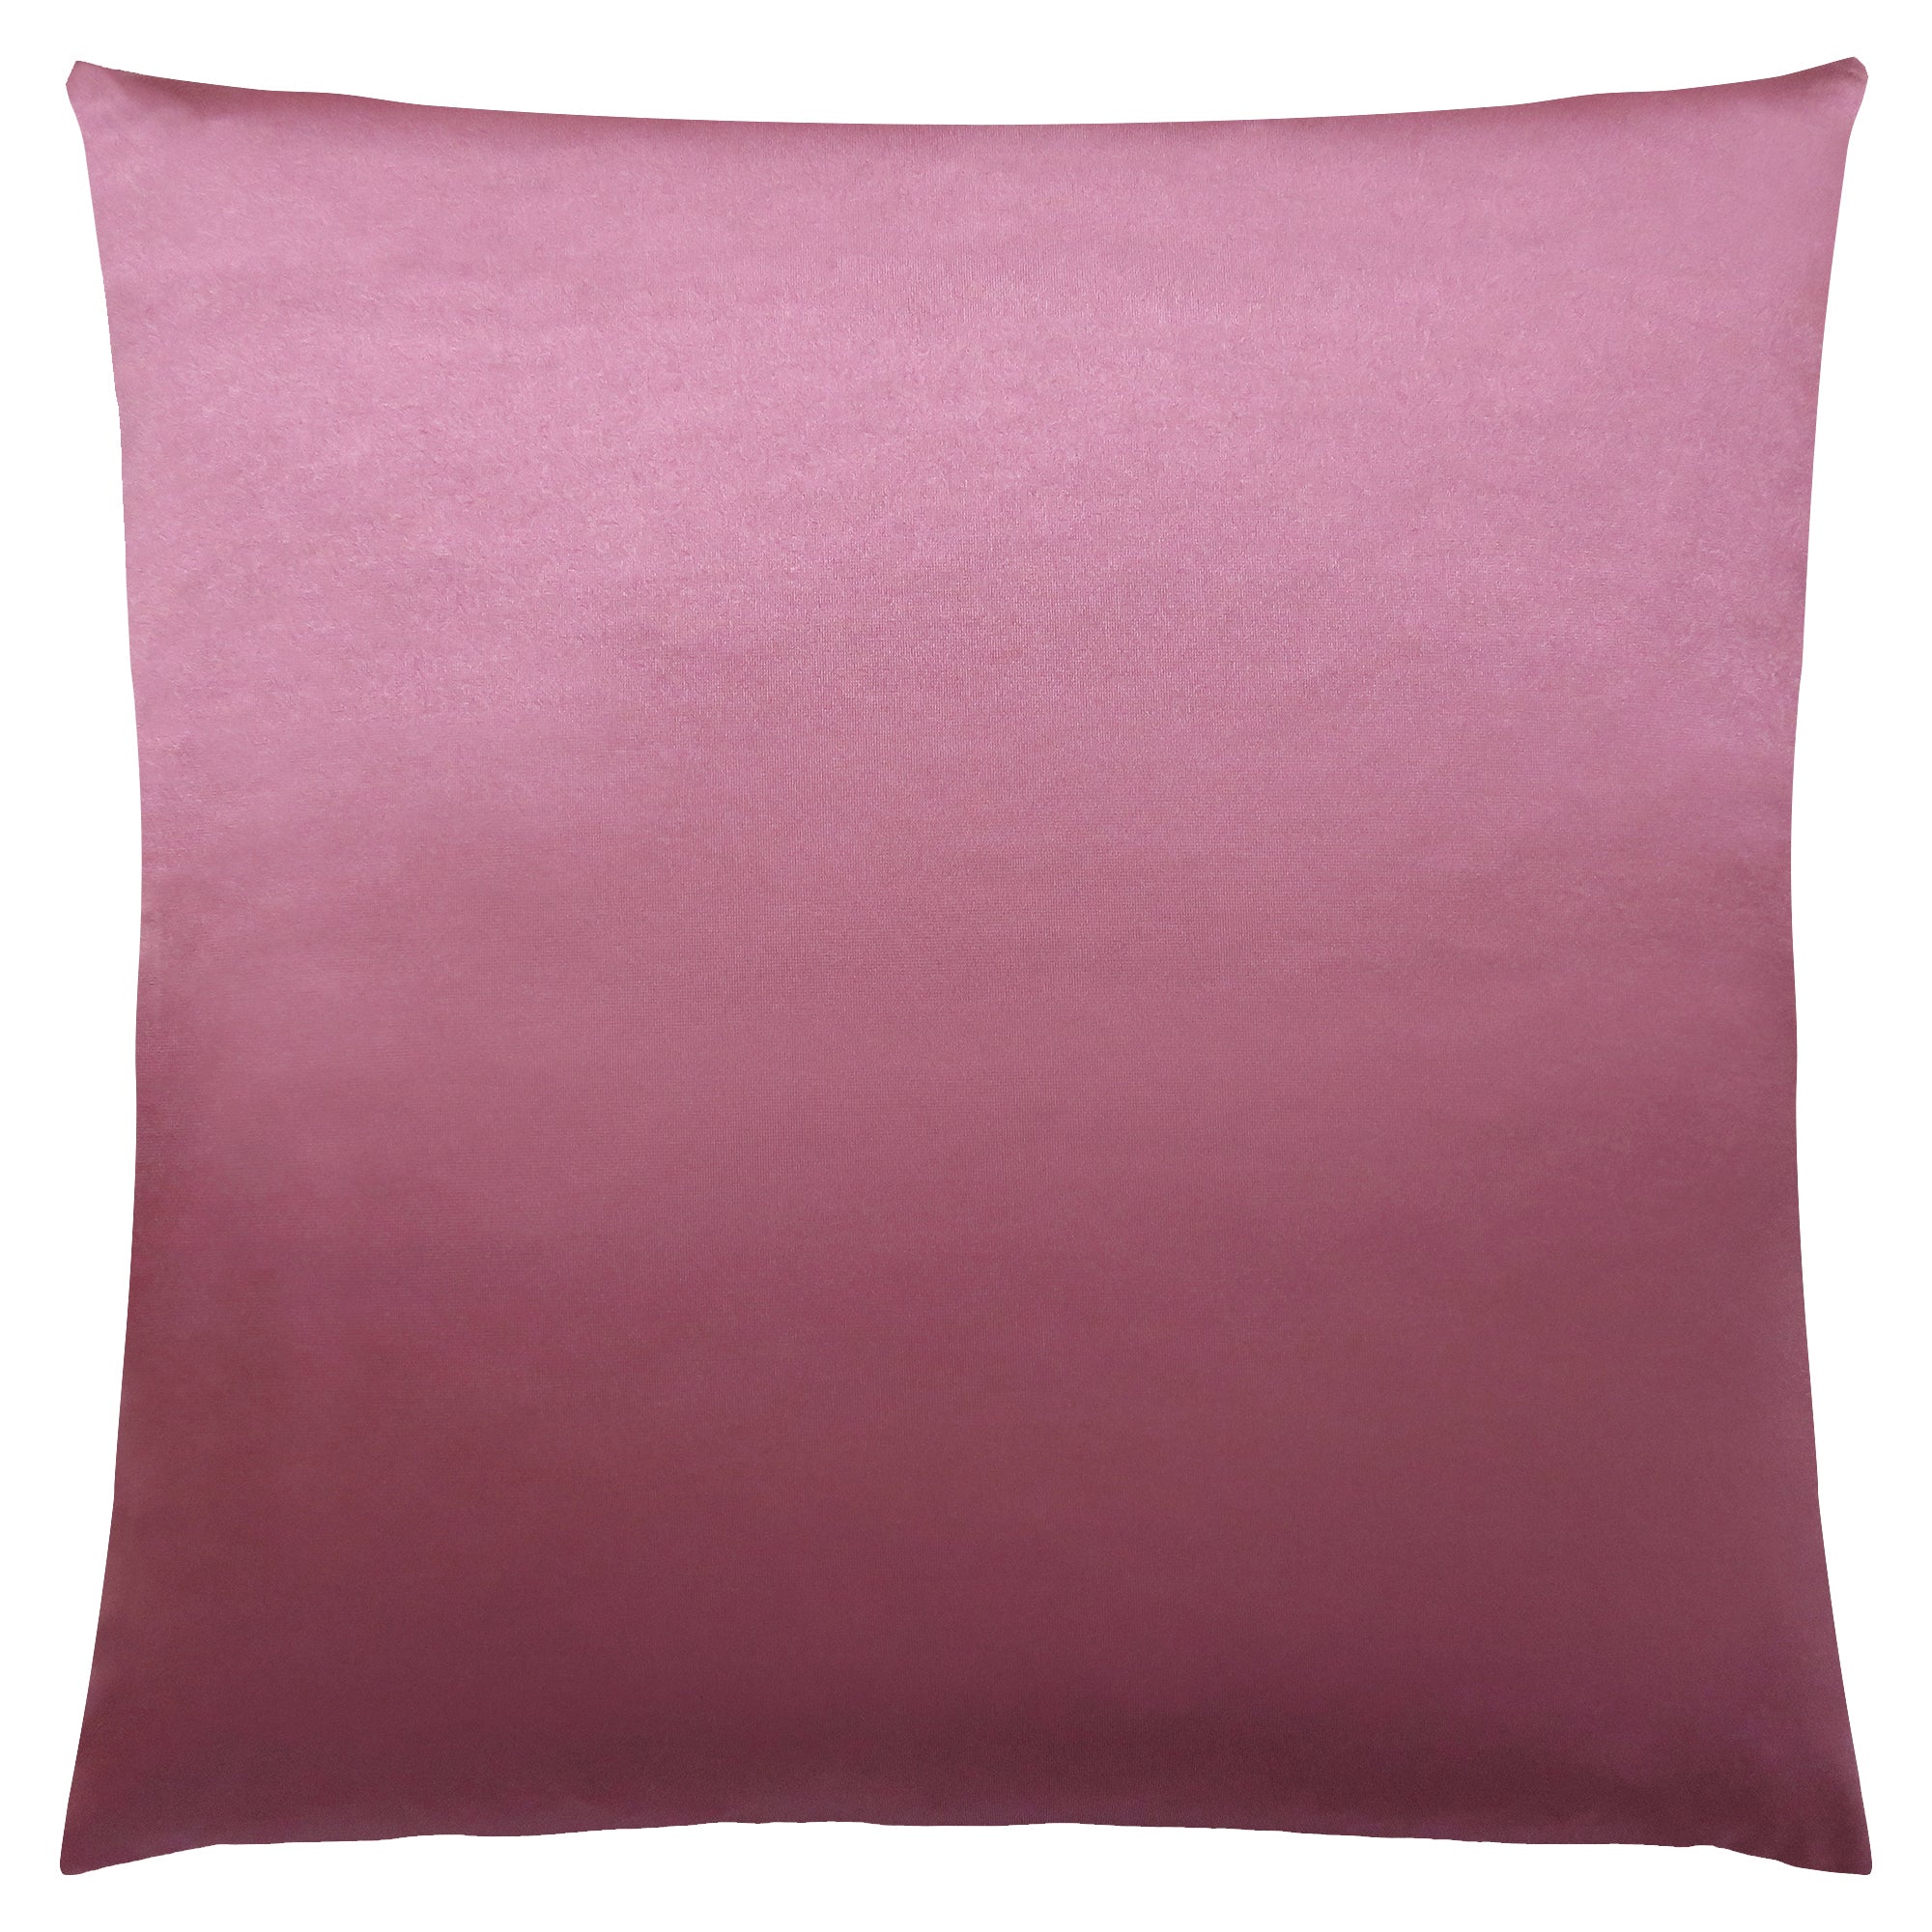 MN-979338    Pillows, 18 X 18 Square, Insert Included, Decorative Throw, Accent, Sofa, Couch, Bed, Satin-Look Polyester Fabric, Hypoallergenic Soft Polyester Insert, Pink, Glam